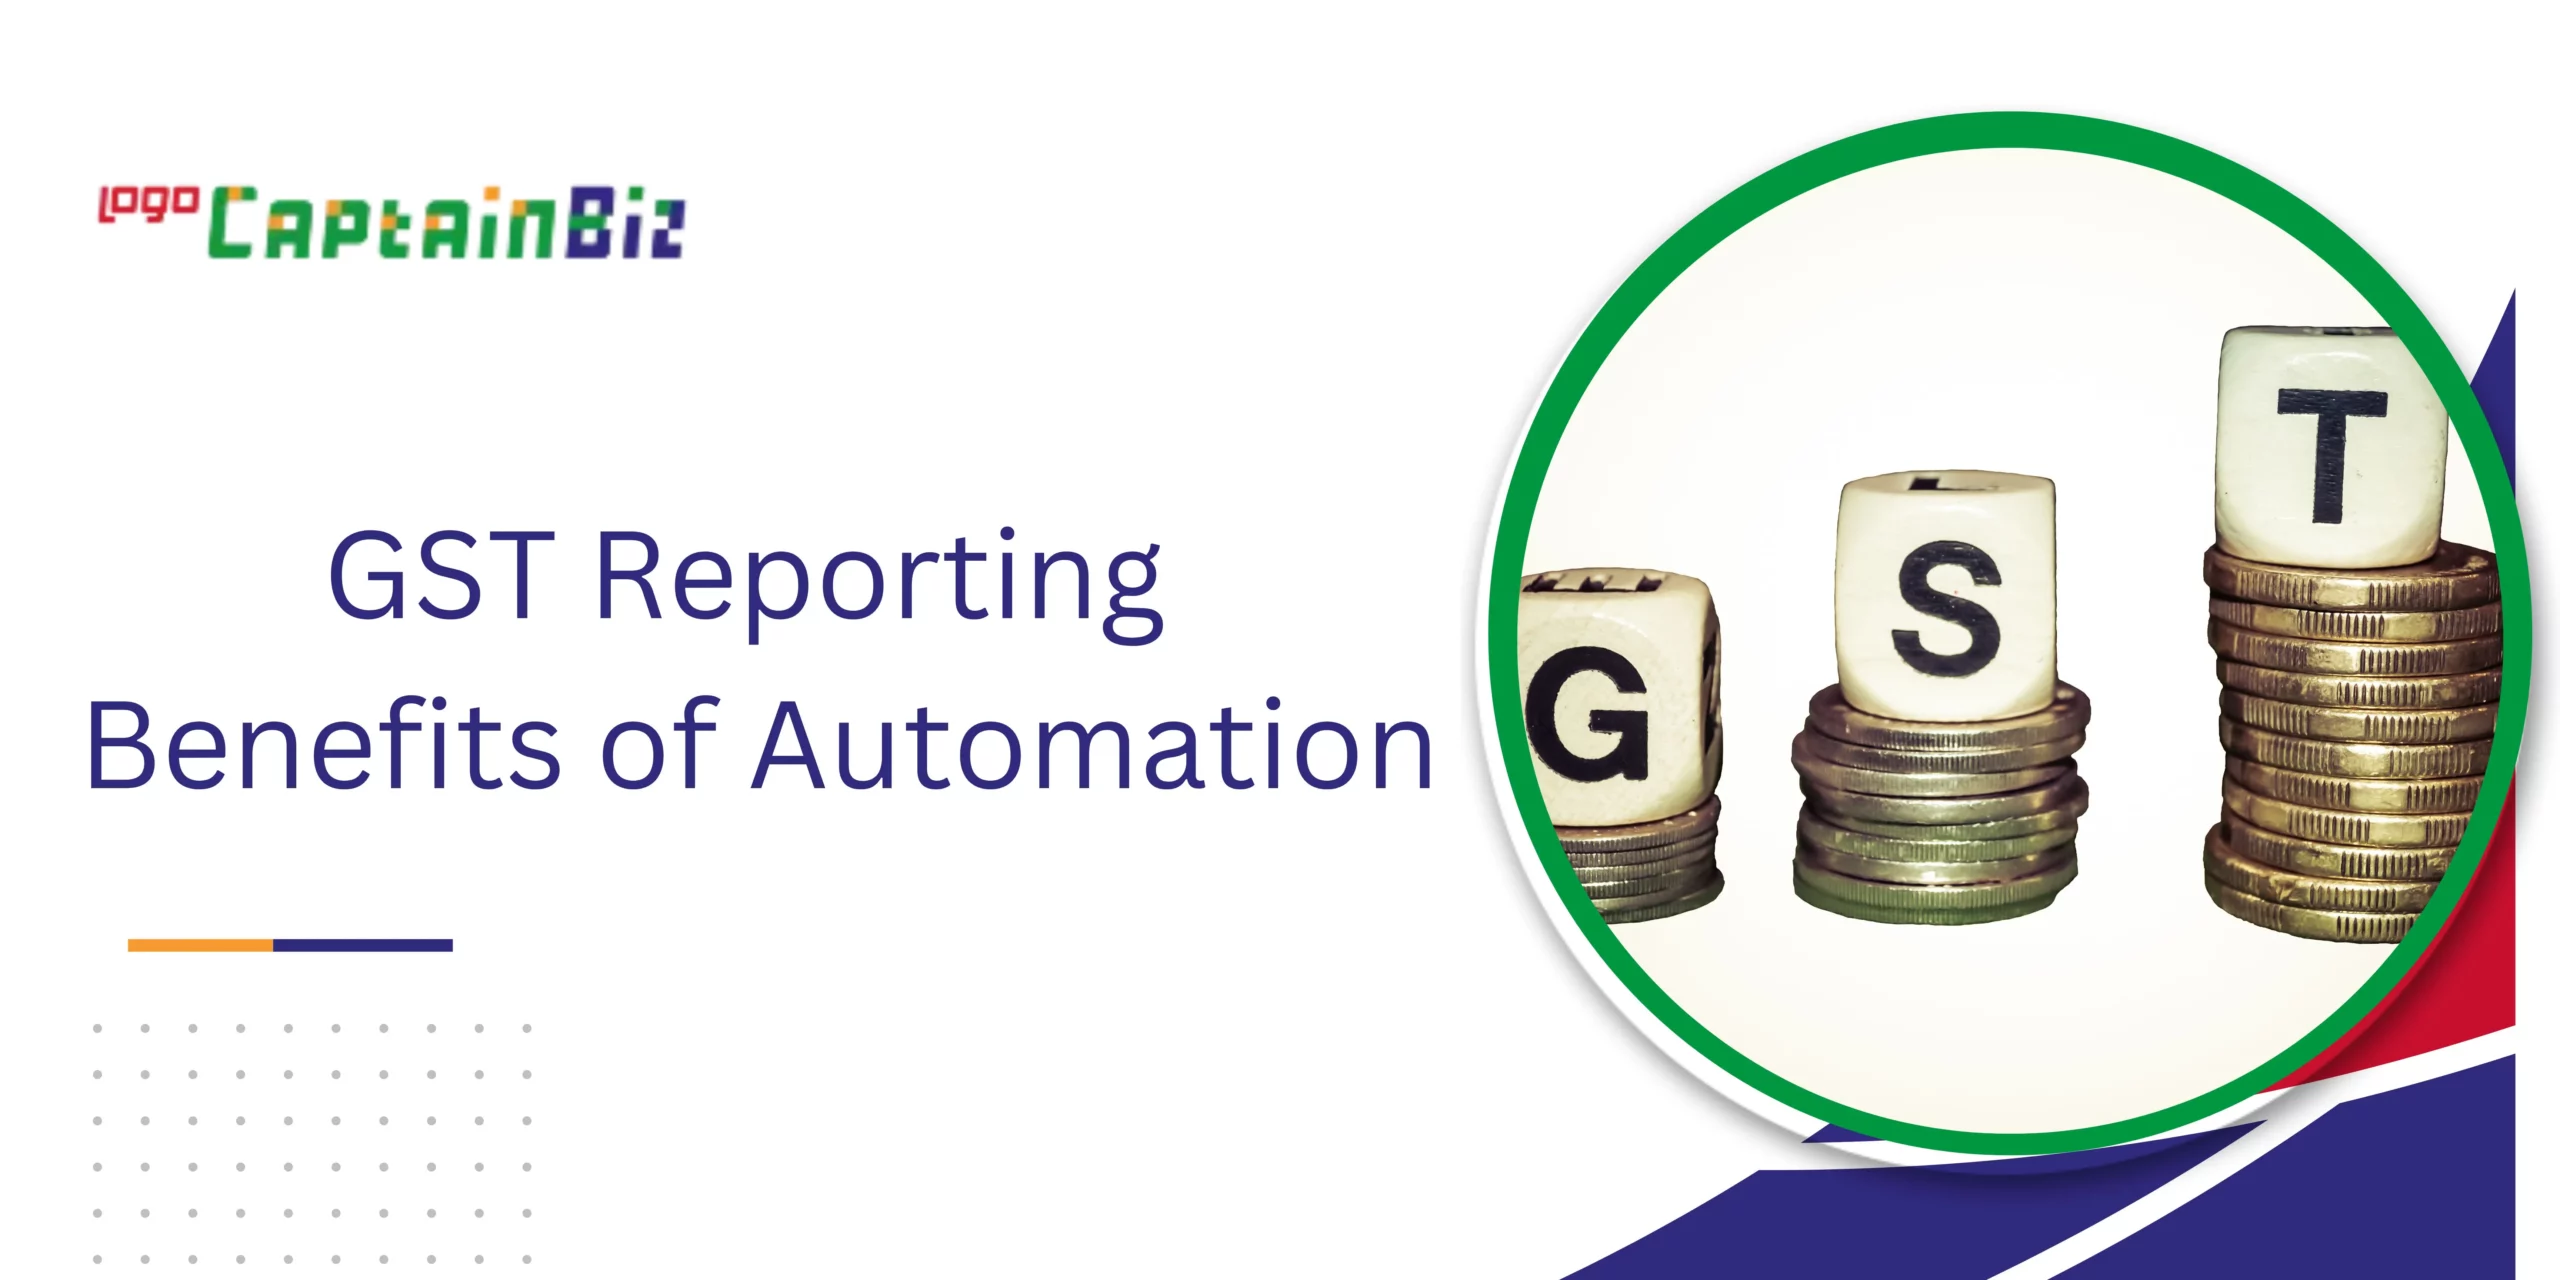 CaptainBiz: GST Reporting Benefits of Automation